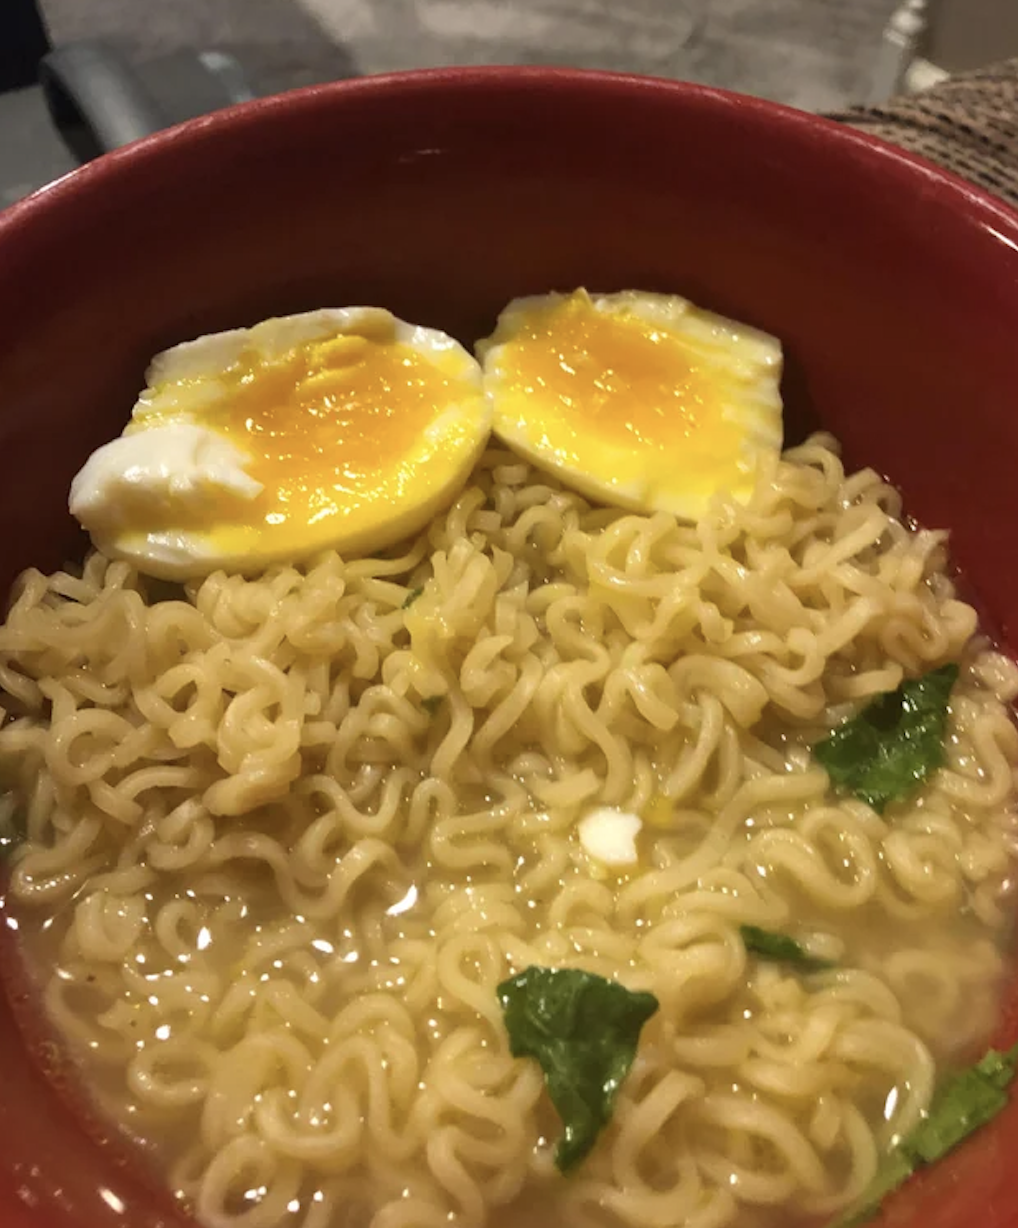 A bowl of ramen soup with an egg